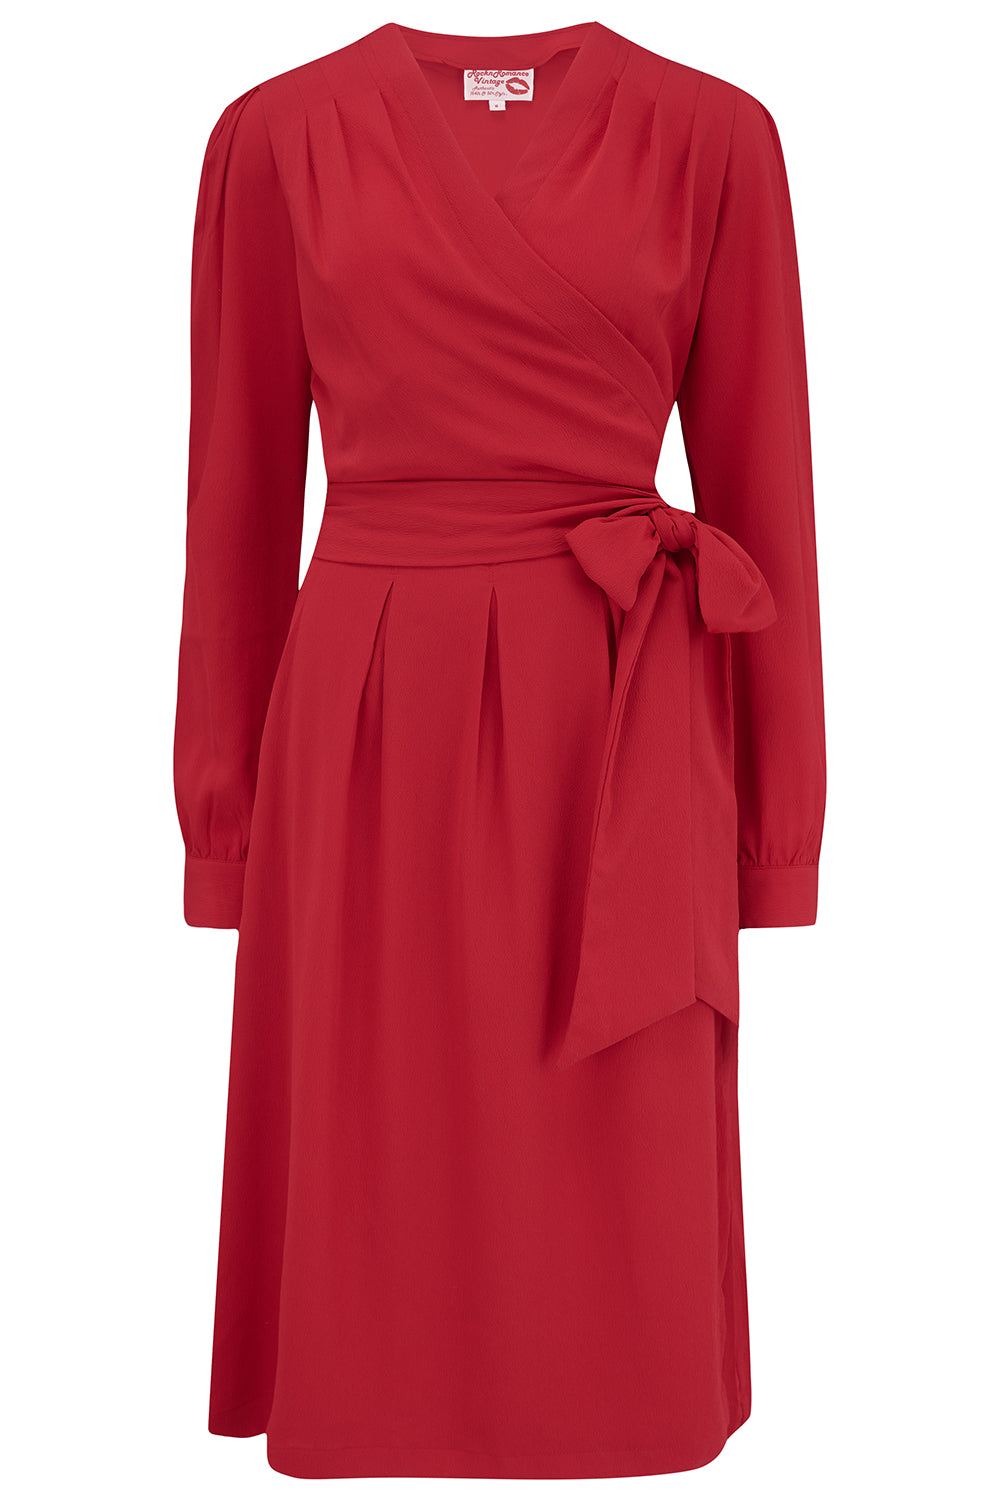 The "Evie" Long Sleeve Wrap Dress in Red, True & Authentic Late 1940s Early 1950s Vintage Style - True and authentic vintage style clothing, inspired by the Classic styles of CC41 , WW2 and the fun 1950s RocknRoll era, for everyday wear plus events like Goodwood Revival, Twinwood Festival and Viva Las Vegas Rockabilly Weekend Rock n Romance Rock n Romance